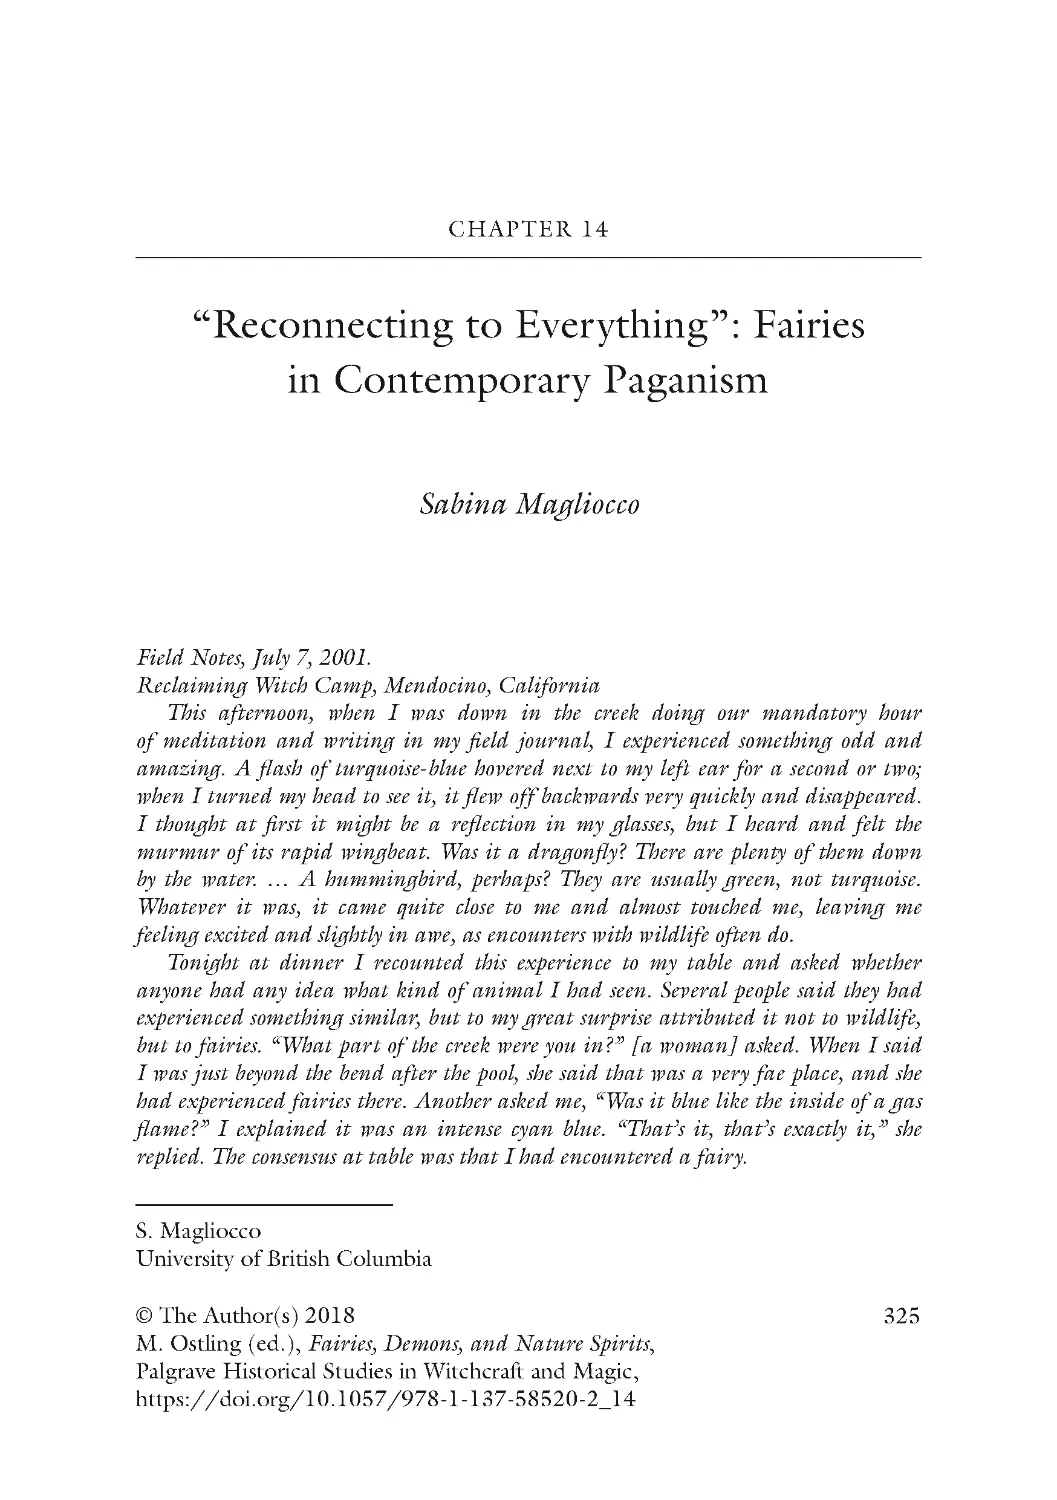 Chapter 14 “Reconnecting to Everything”: Fairies in Contemporary Paganism